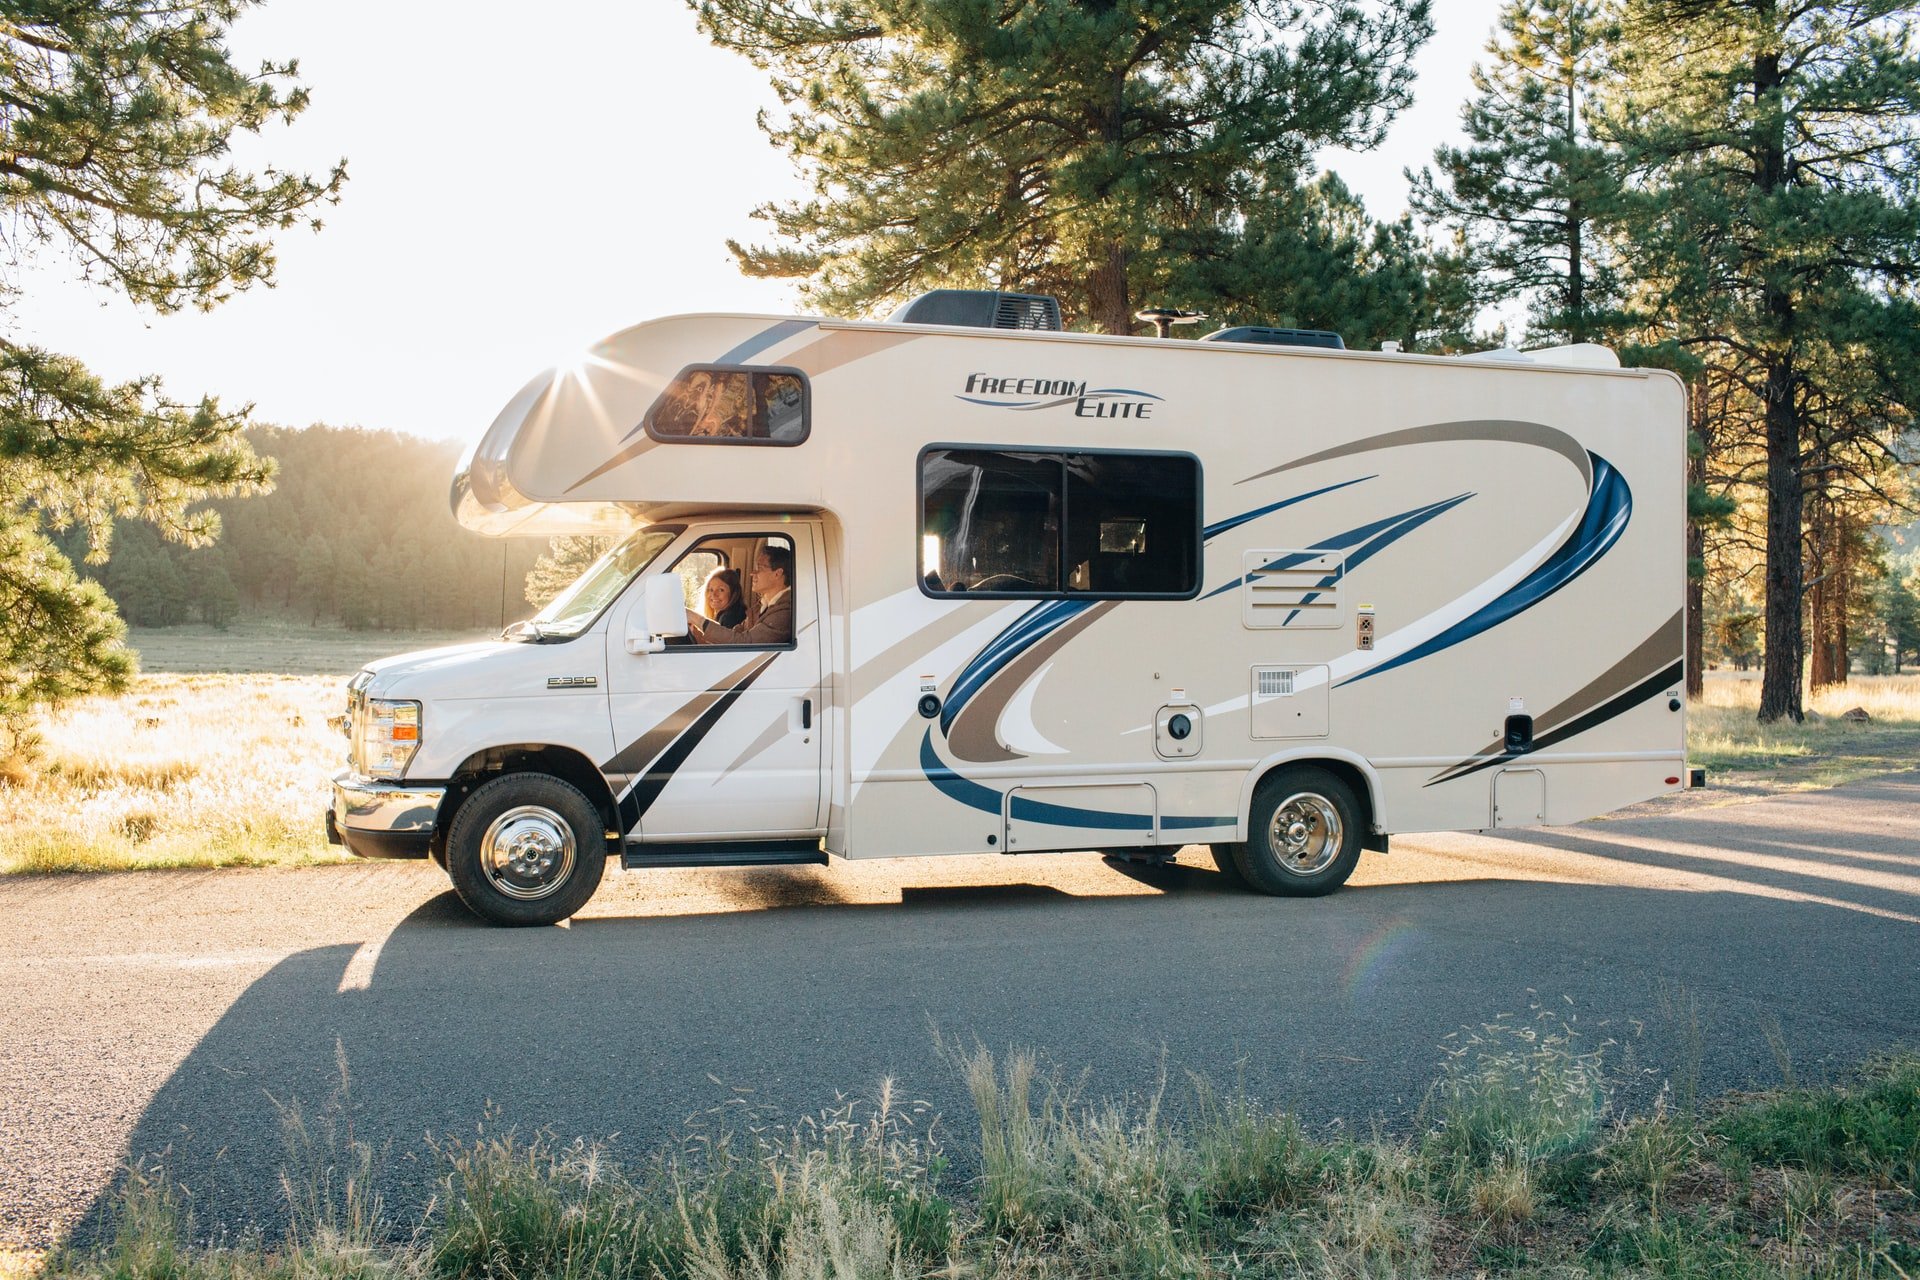 Adventure into summer with a recreational vehicle loan from Dow Credit Union!